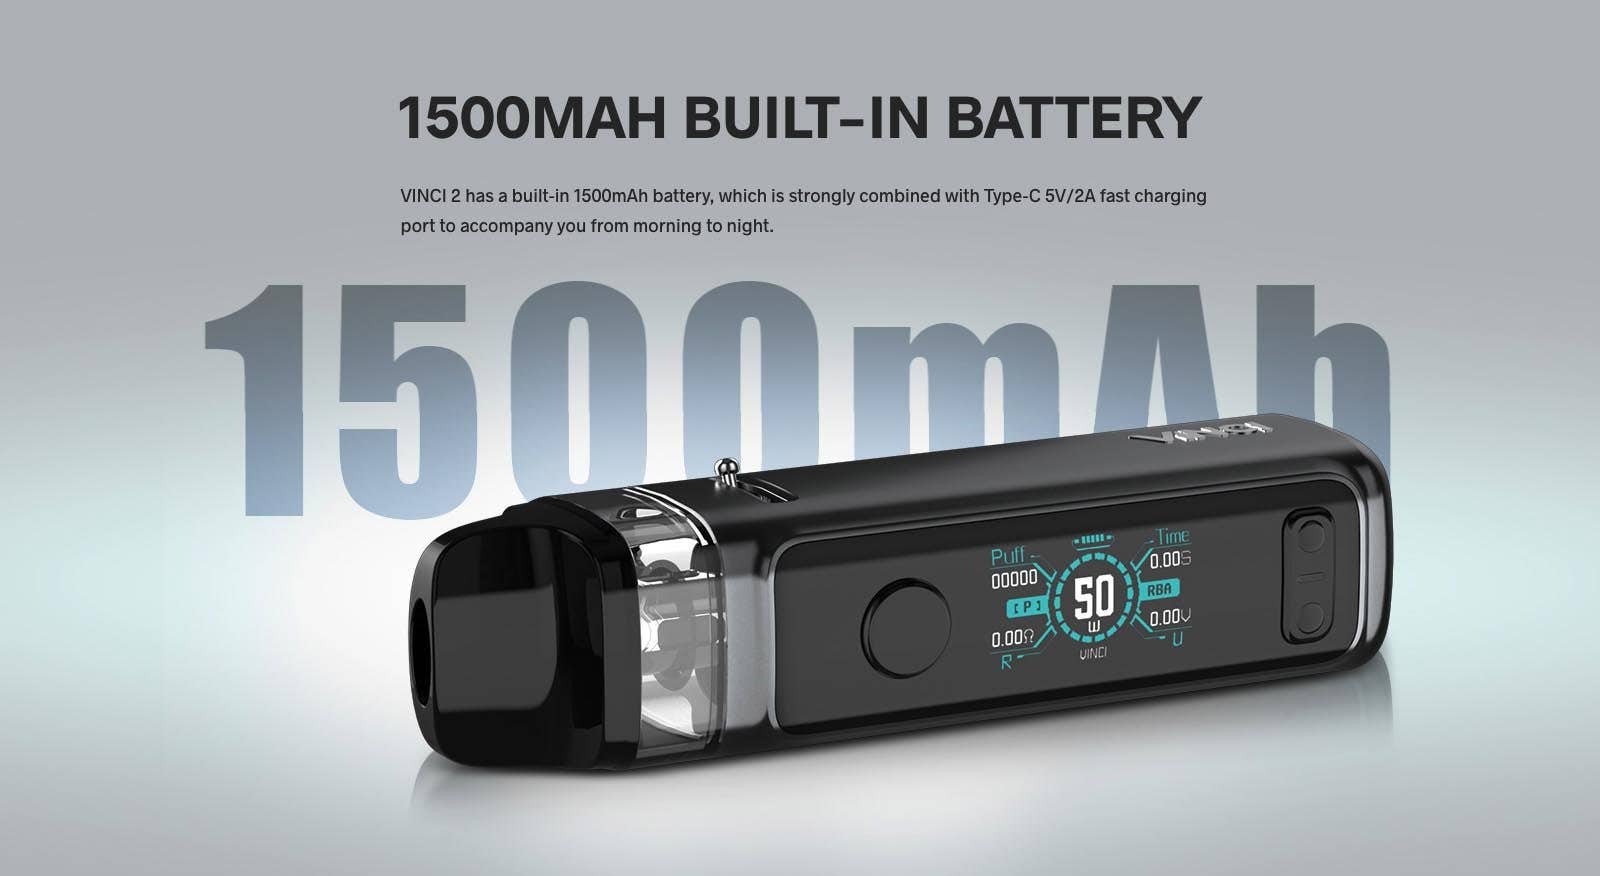 A 1500mAh battery with 2A charging provides enough power for all day vaping